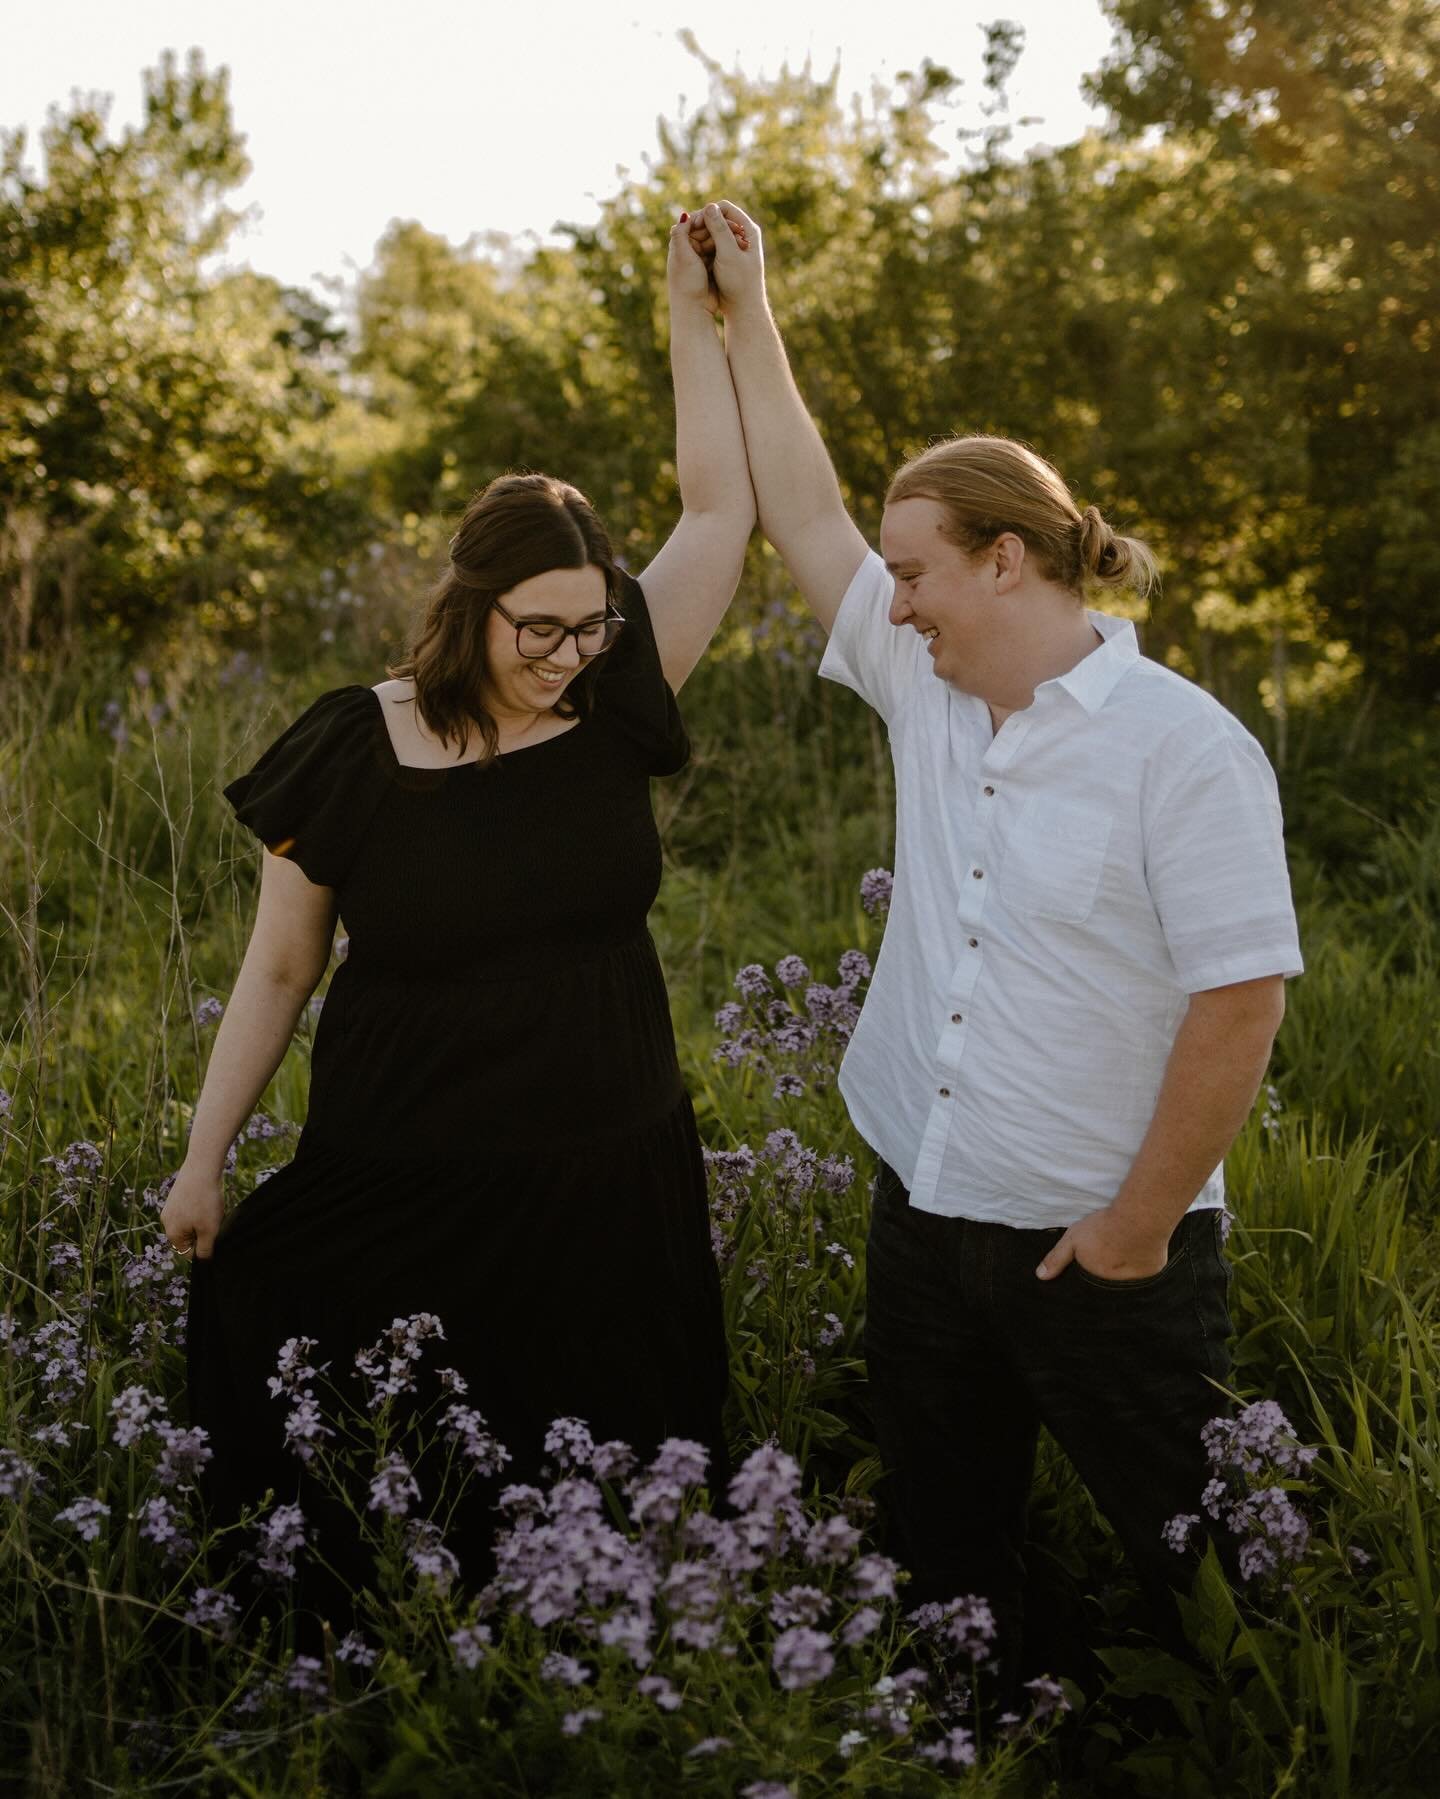 Sunset with Katey &amp; Nathan ☀️✨

Purple wildflowers of my dreams! These two were super fun &amp; down to trek in some fields in order to get the shot. 

Excited to work with Katey again this weekend to celebrate Madison &amp; Evan at New Journey F